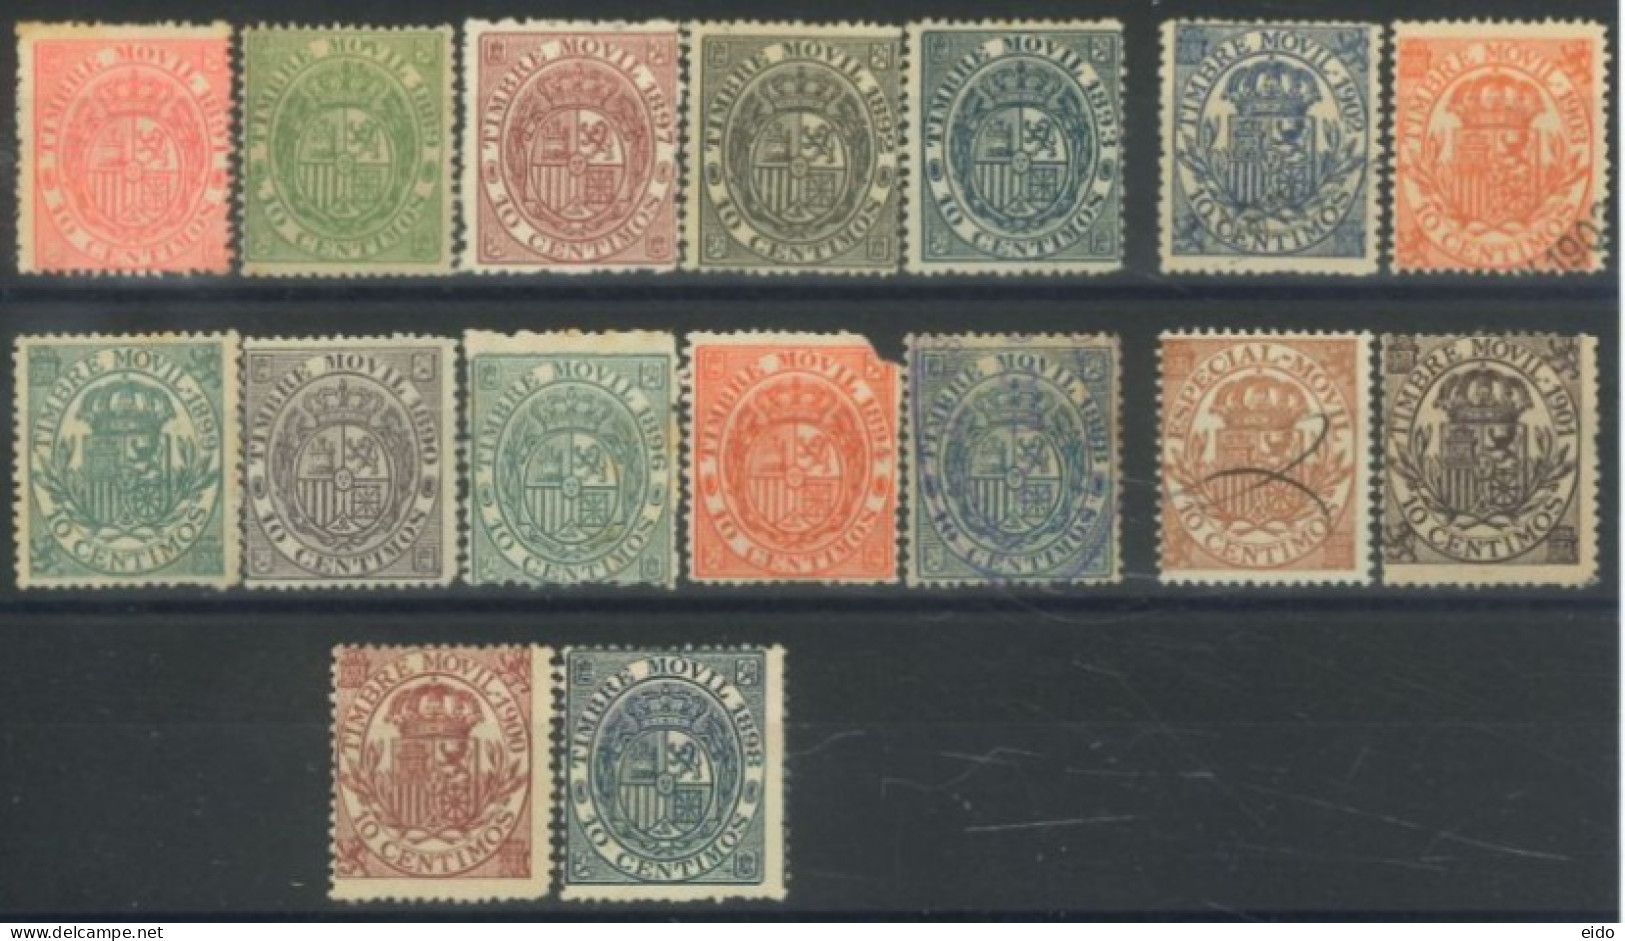 SPAIN, 1888/1903, REVENUE ADHESIVE STAMPS SET OF 16, MOSTLY MINT NO GUM (MNG), ONLY 3 STAMPS USED. - Ongebruikt